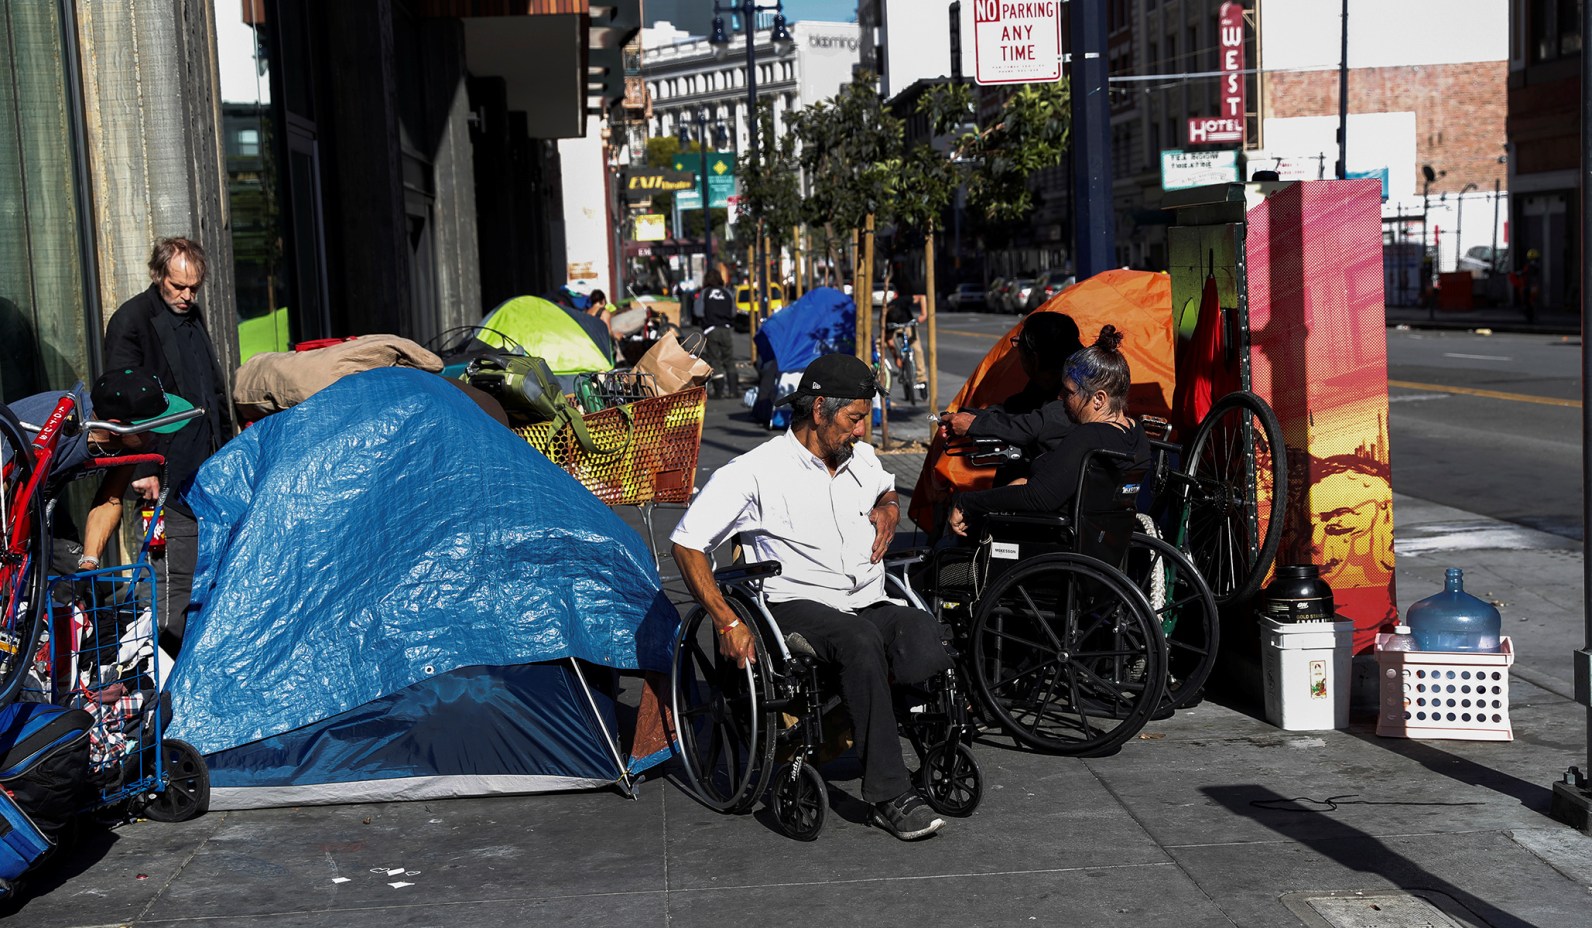 San Francisco street filled with Homeless squatters